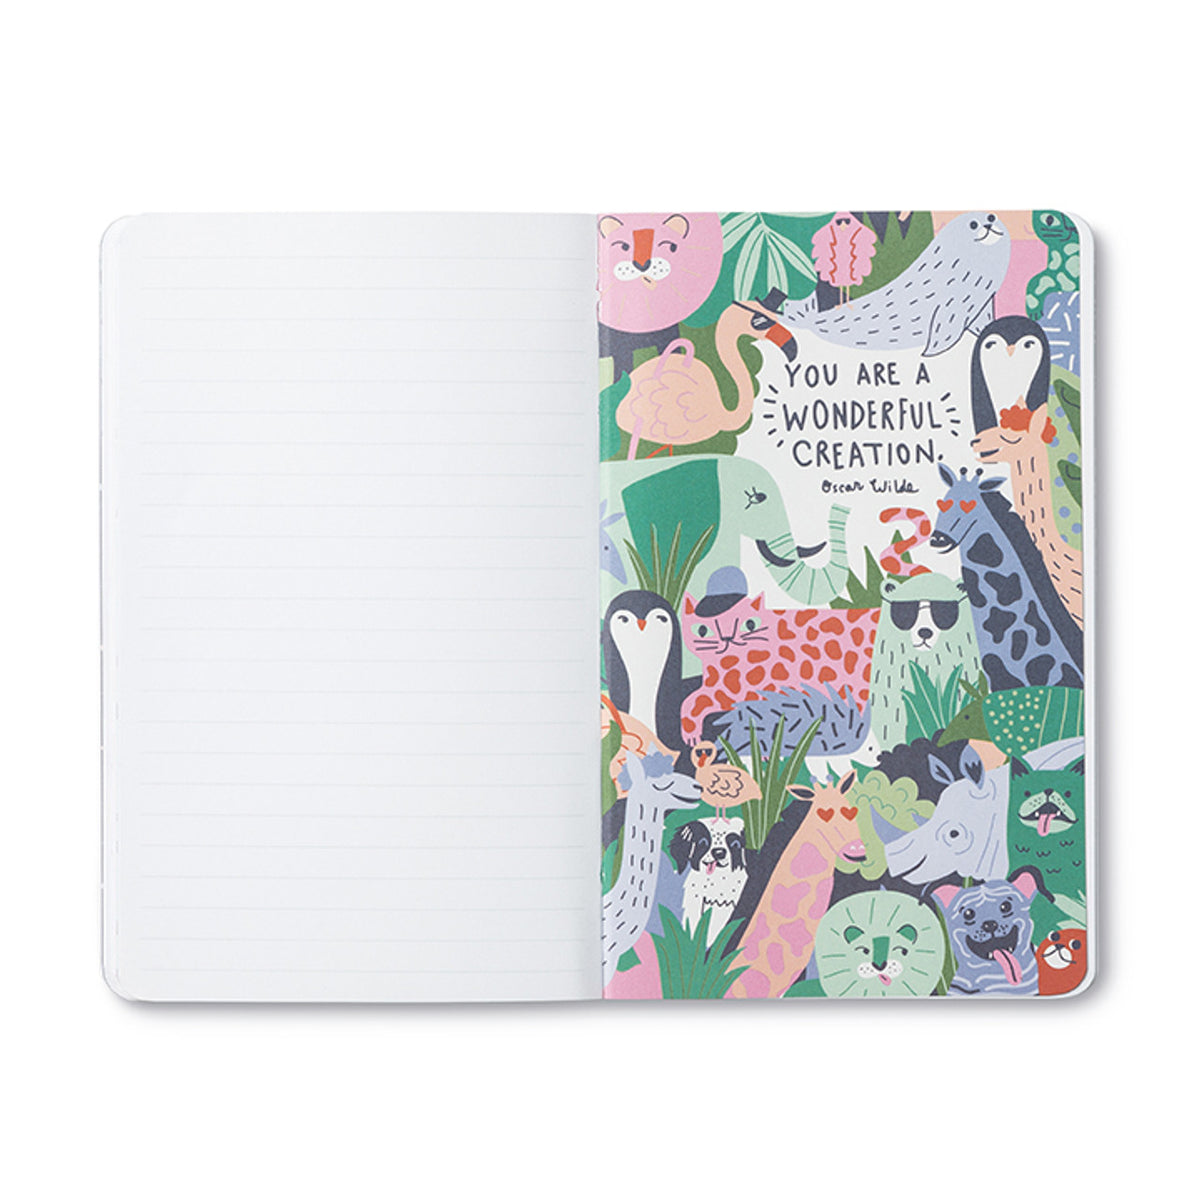 You Are Weird, Unique, And Wildly Perfect Write Now Softcover Journal